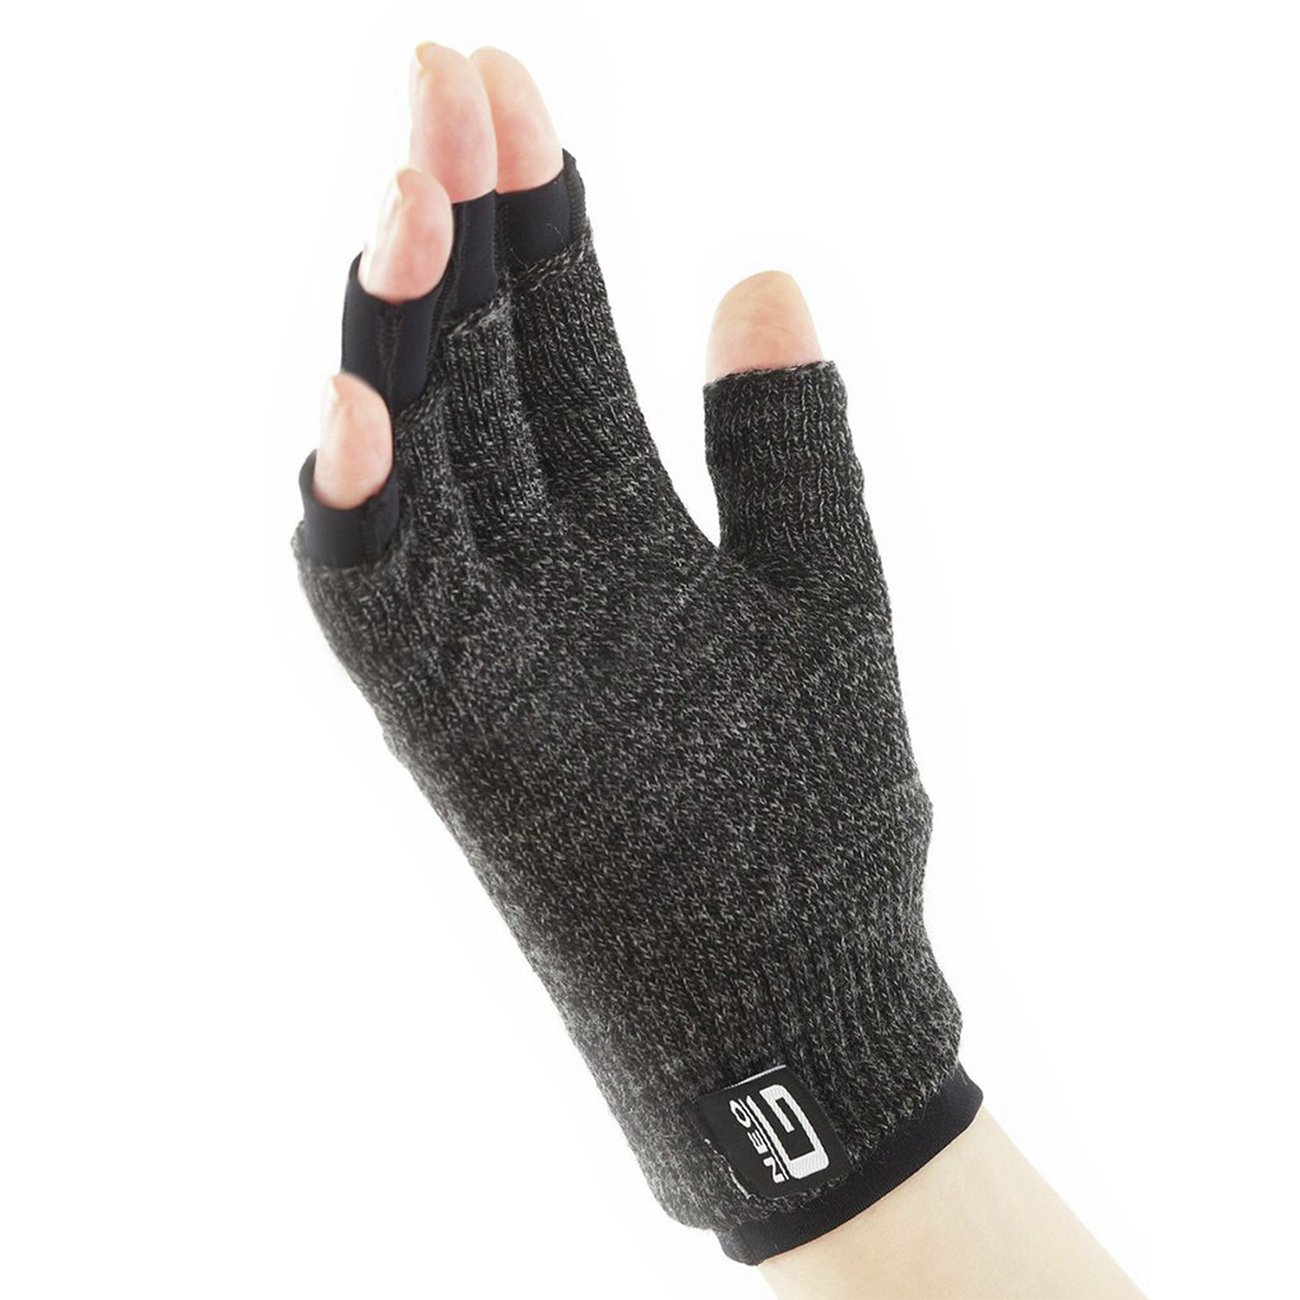 Neo G Pair of Comfort Relief Arthritis Gloves - Small